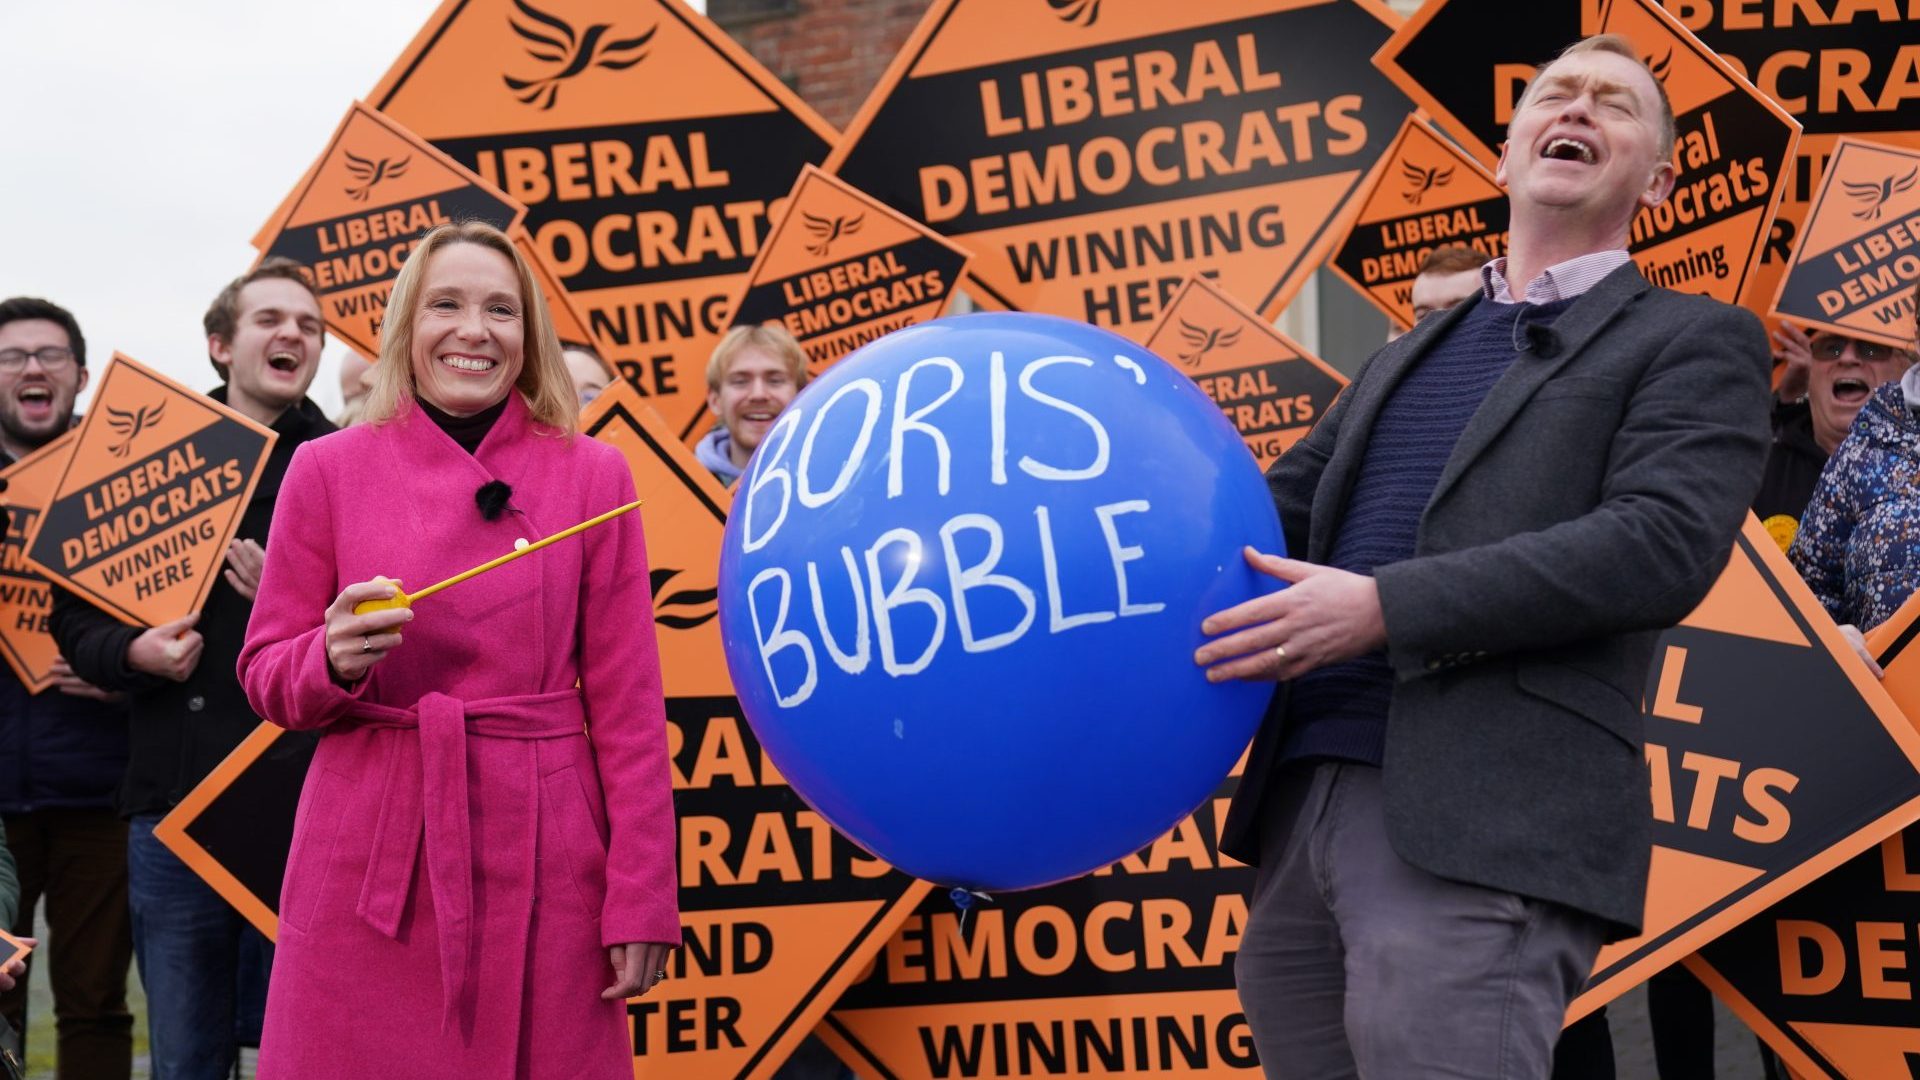 Newly elected Liberal Democrat MP Helen Morgan bursts 'Boris' bubble' held by colleague Tim Farron following her victory in the North Shropshire by-election. Photo:  Jacob King/PA Wire/PA Images.